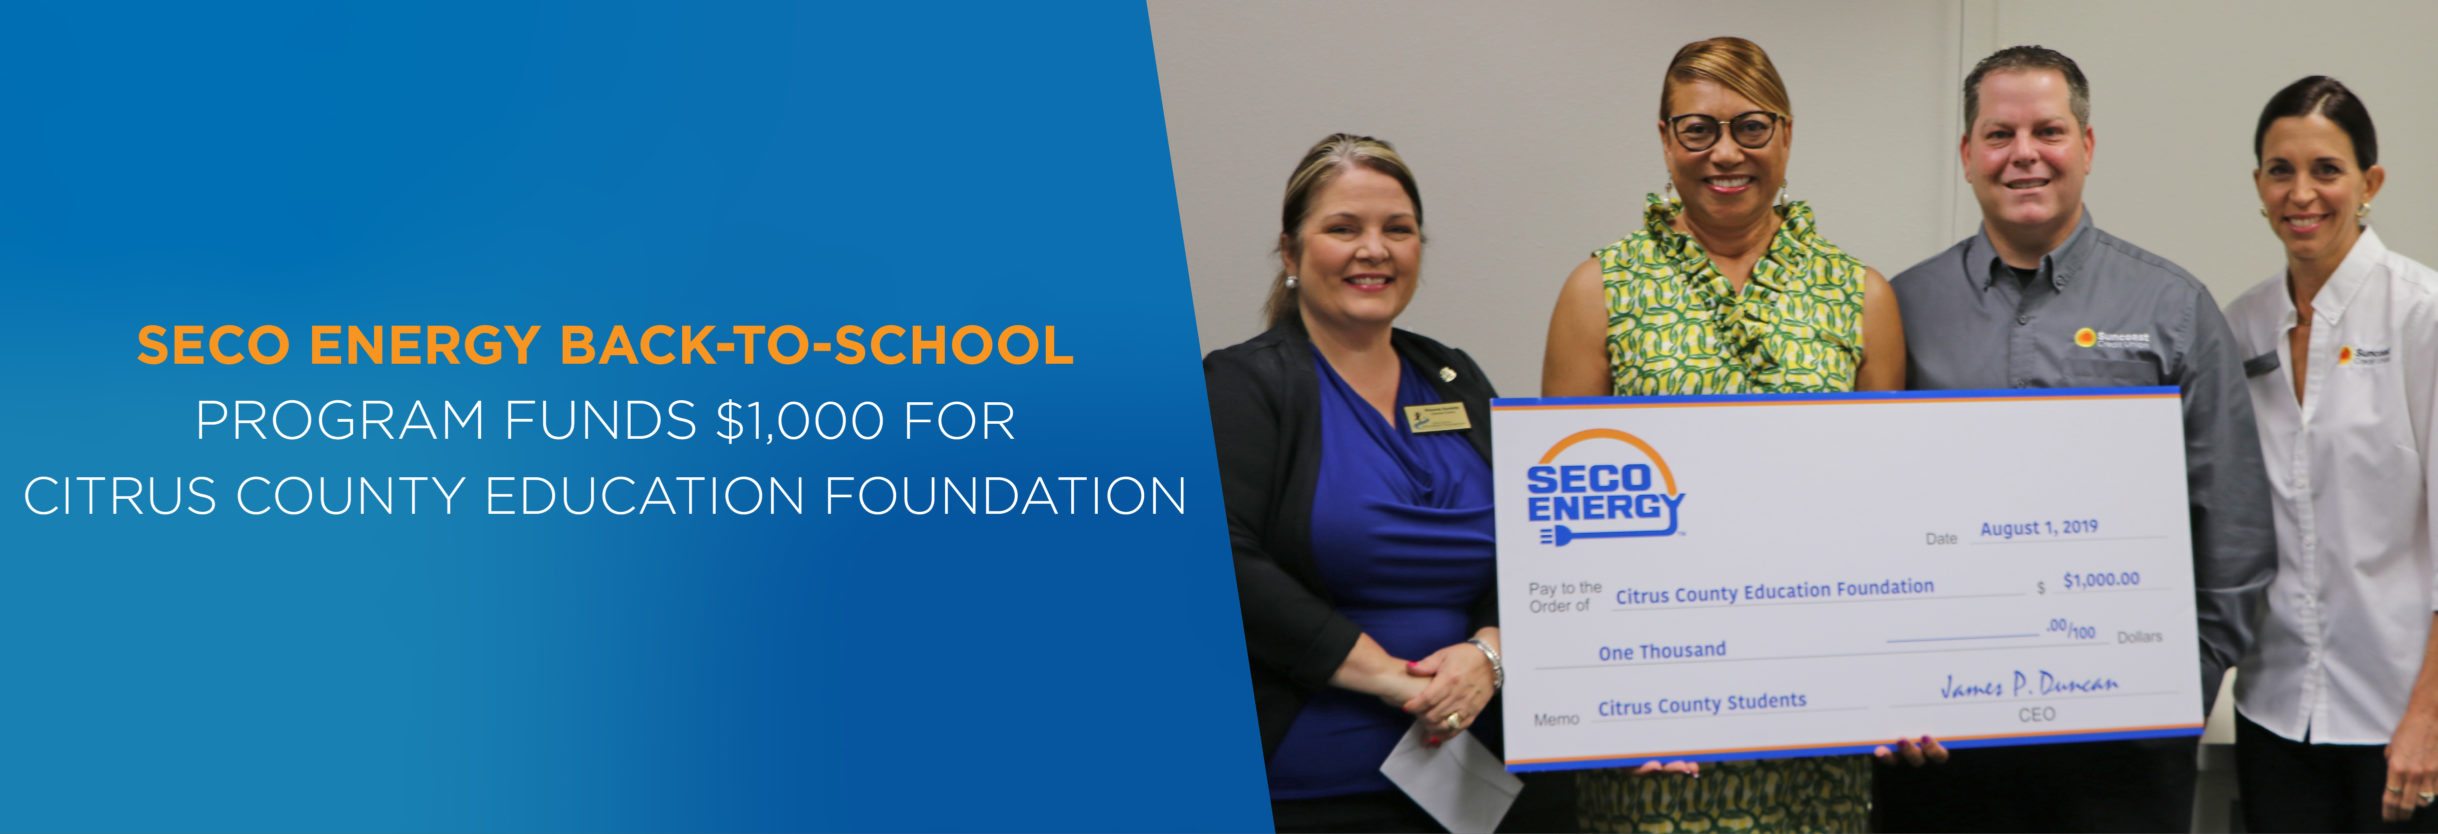 SECO Energy Back-To-School Program Funds $1,000 for Citrus County Education Foundation